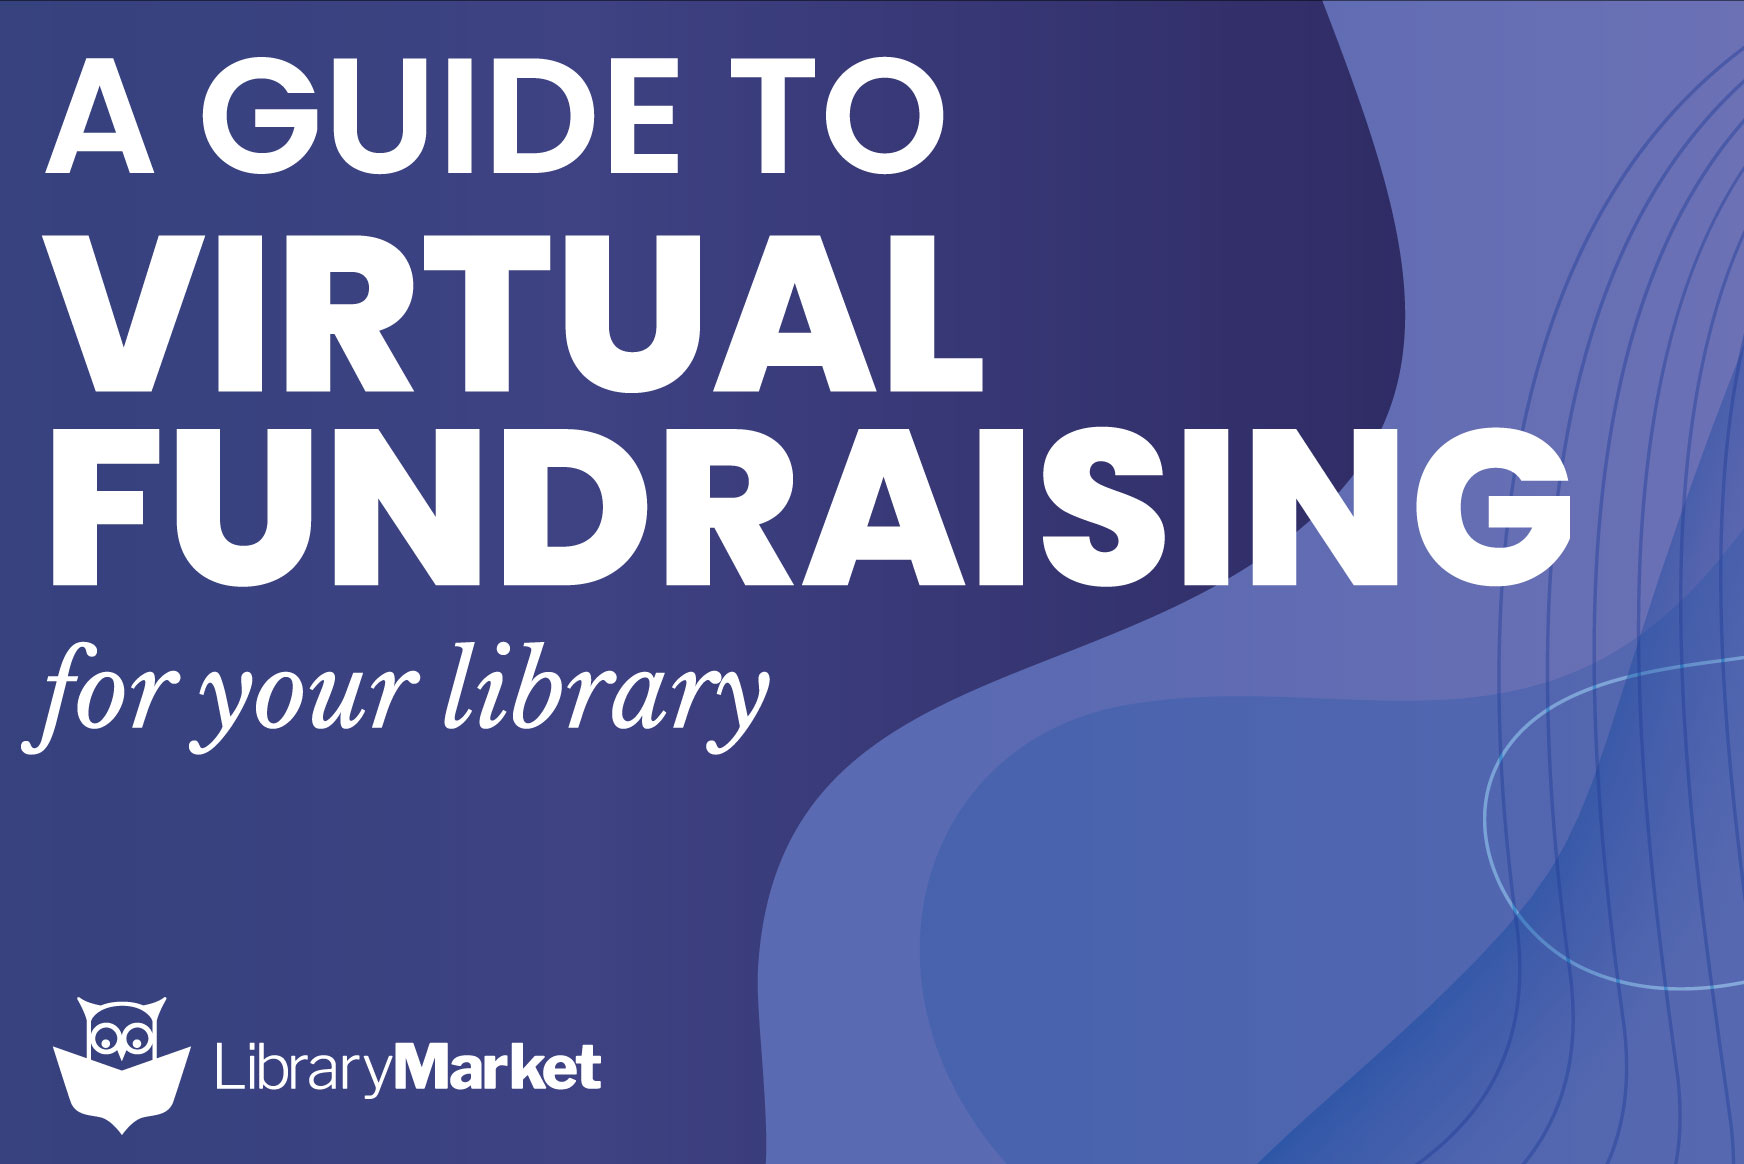 Blog Post - A Guide to Virtual Fundraising for Your Library